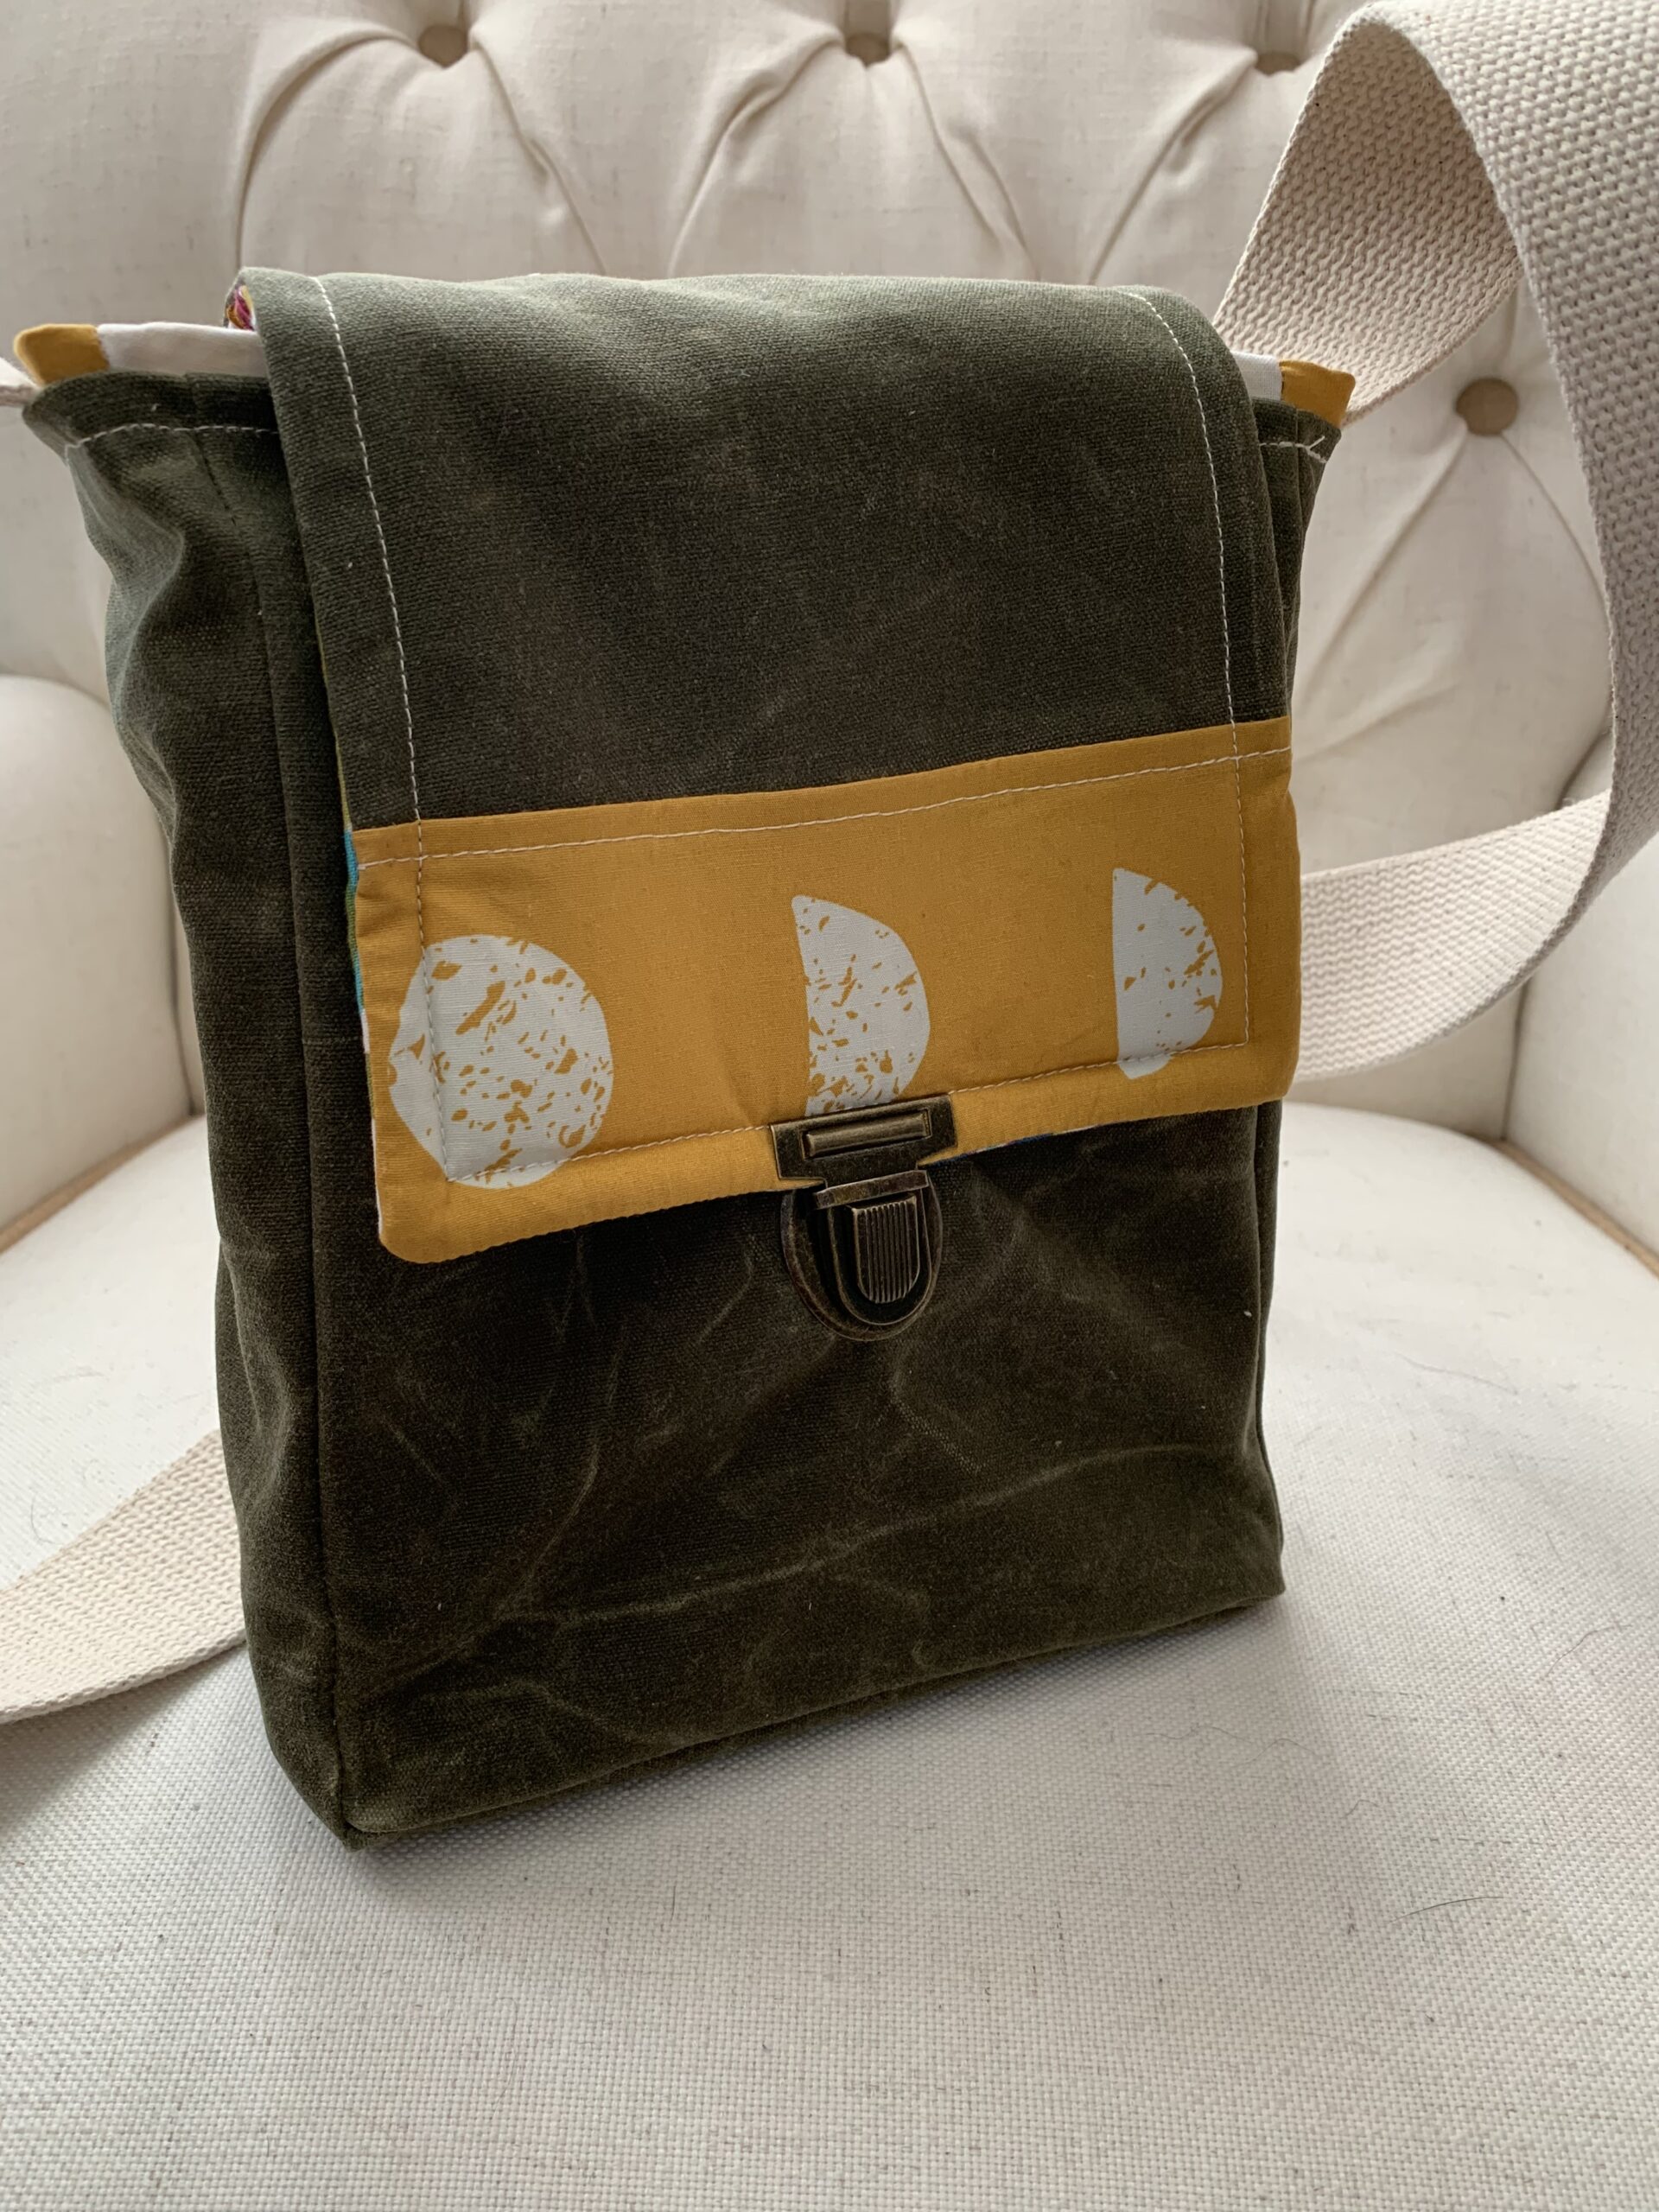 How to Sew A Sweet Simple Small Press Lock Purse